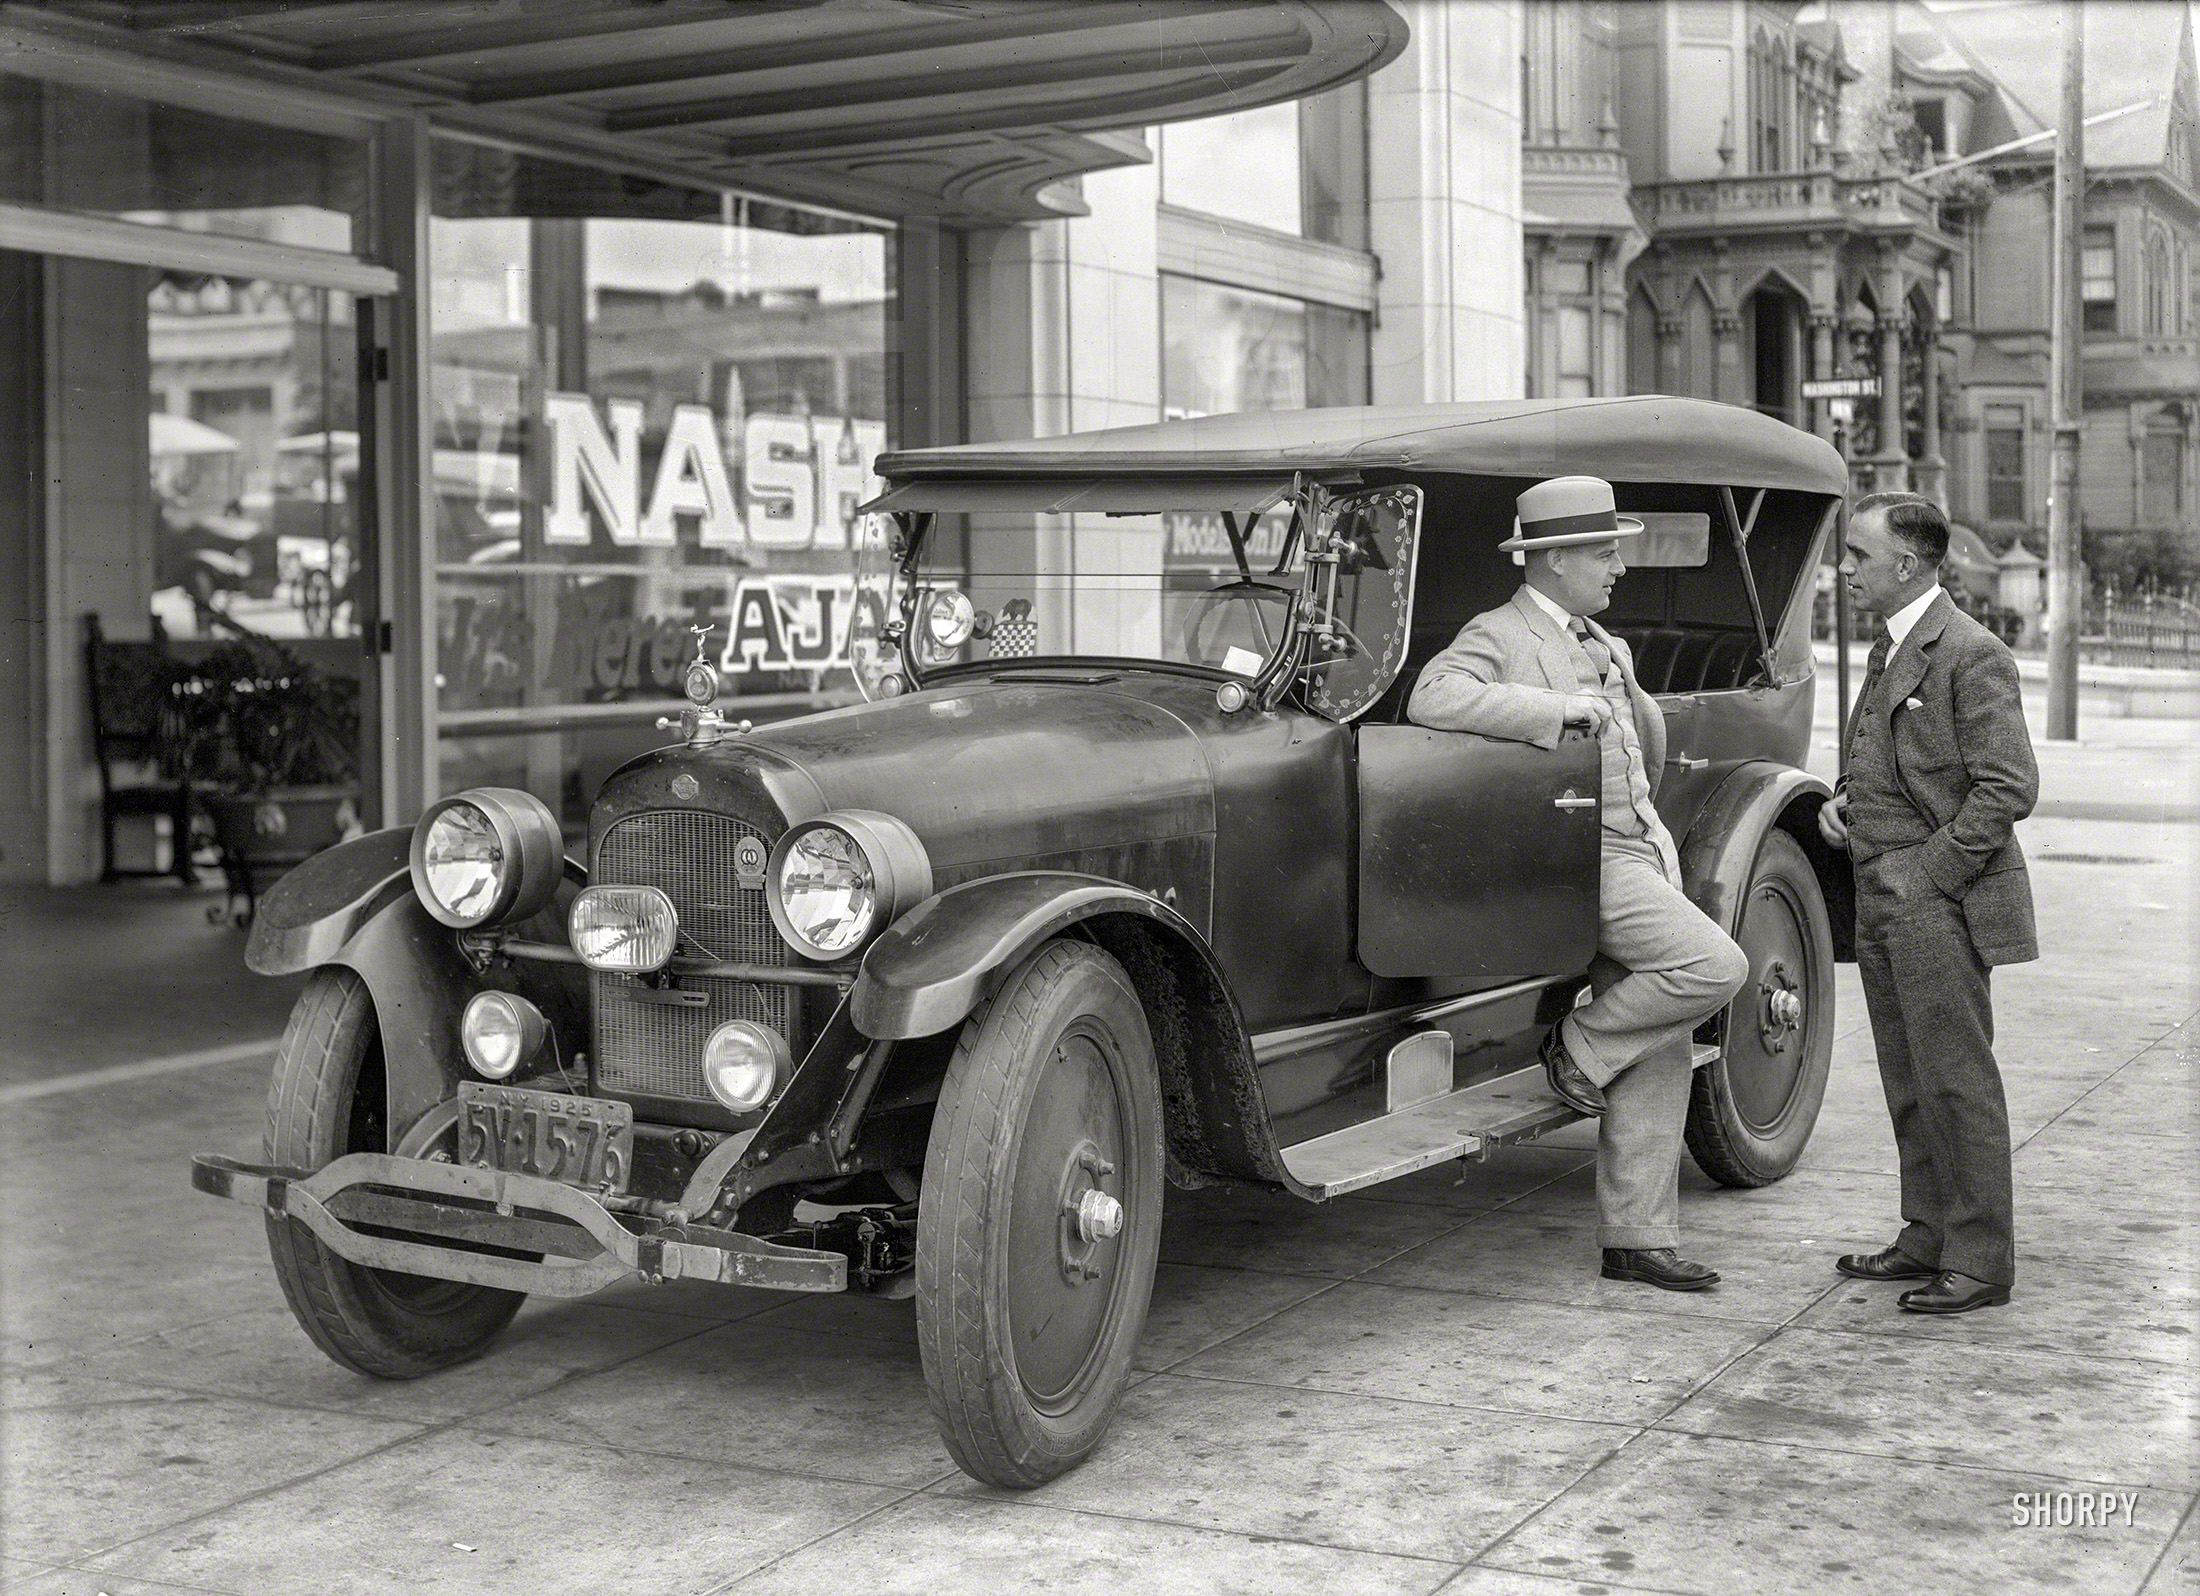 San Francisco, 1925. "Nash touring car at Nash-Ajax agency." Latest entry in the Shorpy Catalogue of Forgotten Phaetons. 5x7 glass negative. View full size.